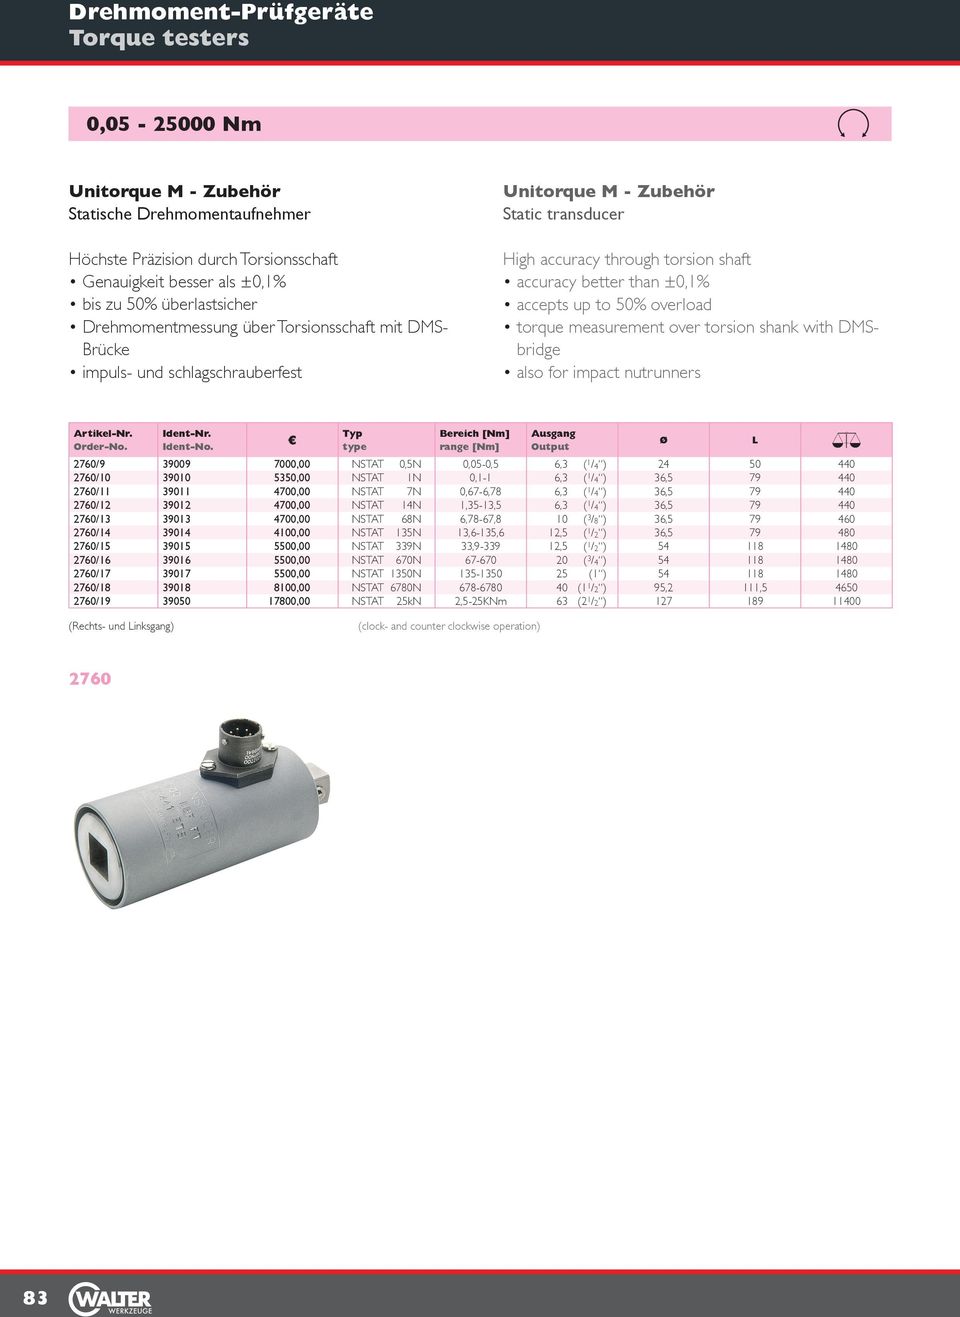 torque measurement over torsion shank with DMSbridge also for impact nutrunners Ausgang Output 2760/9 39009 7000,00 NSTAT 0,5N 0,05-0,5 6,3 ( 1 / 4 ) 24 50 440 2760/10 39010 5350,00 NSTAT 1N 0,1-1